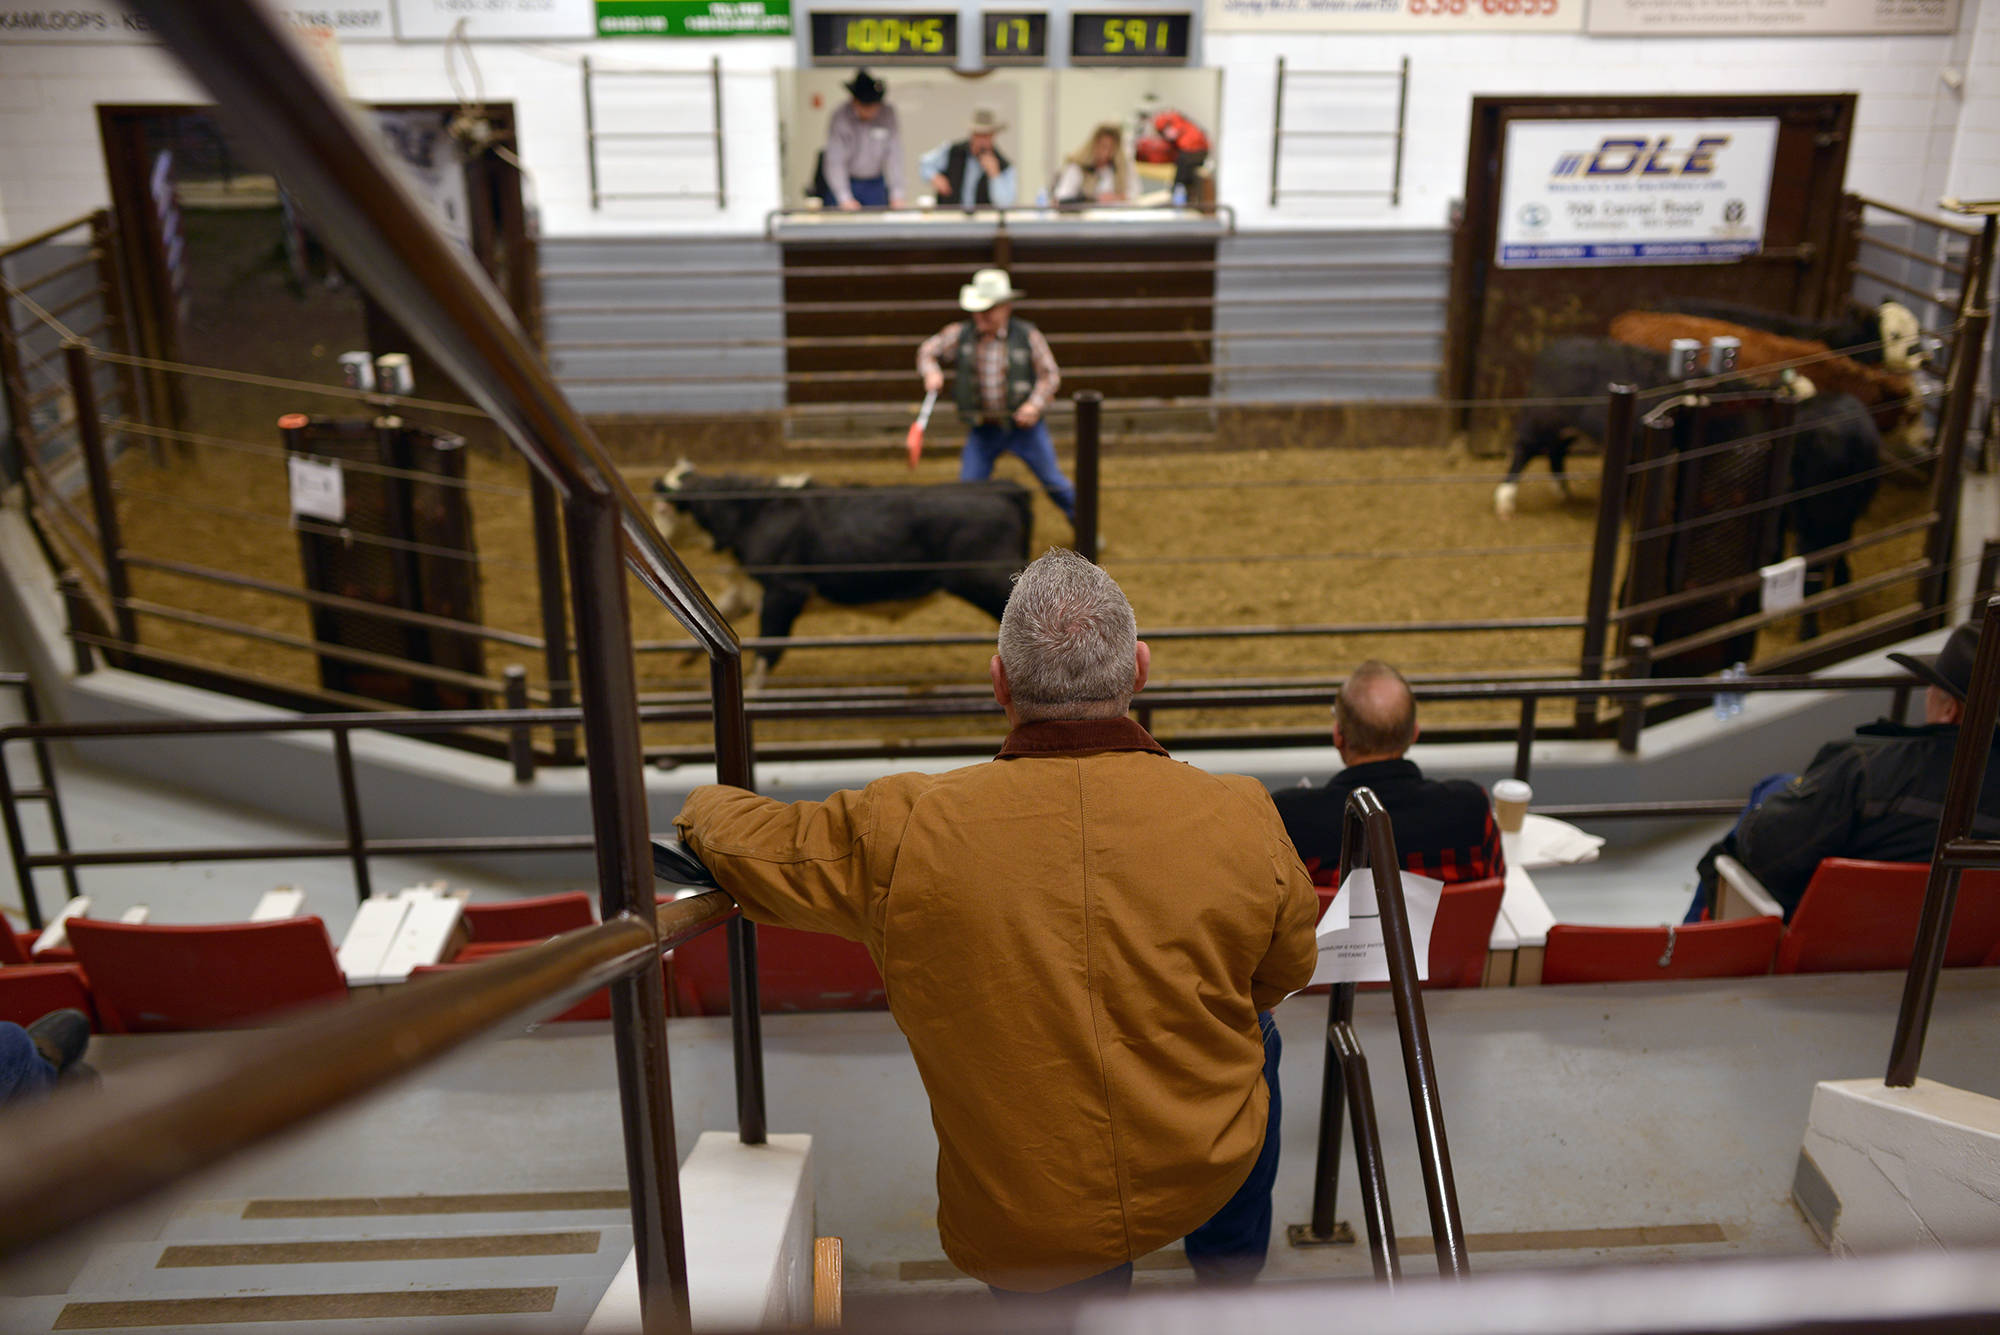 Every Tuesday, Cory Lepine is found at BC Livestock Producers Co. in Kamloops, where cattle are being auctioned. There, he meets with farmers, industry leaders and brand inspectors, and oversees auctions. (Phil McLachlan - Black Press Media)